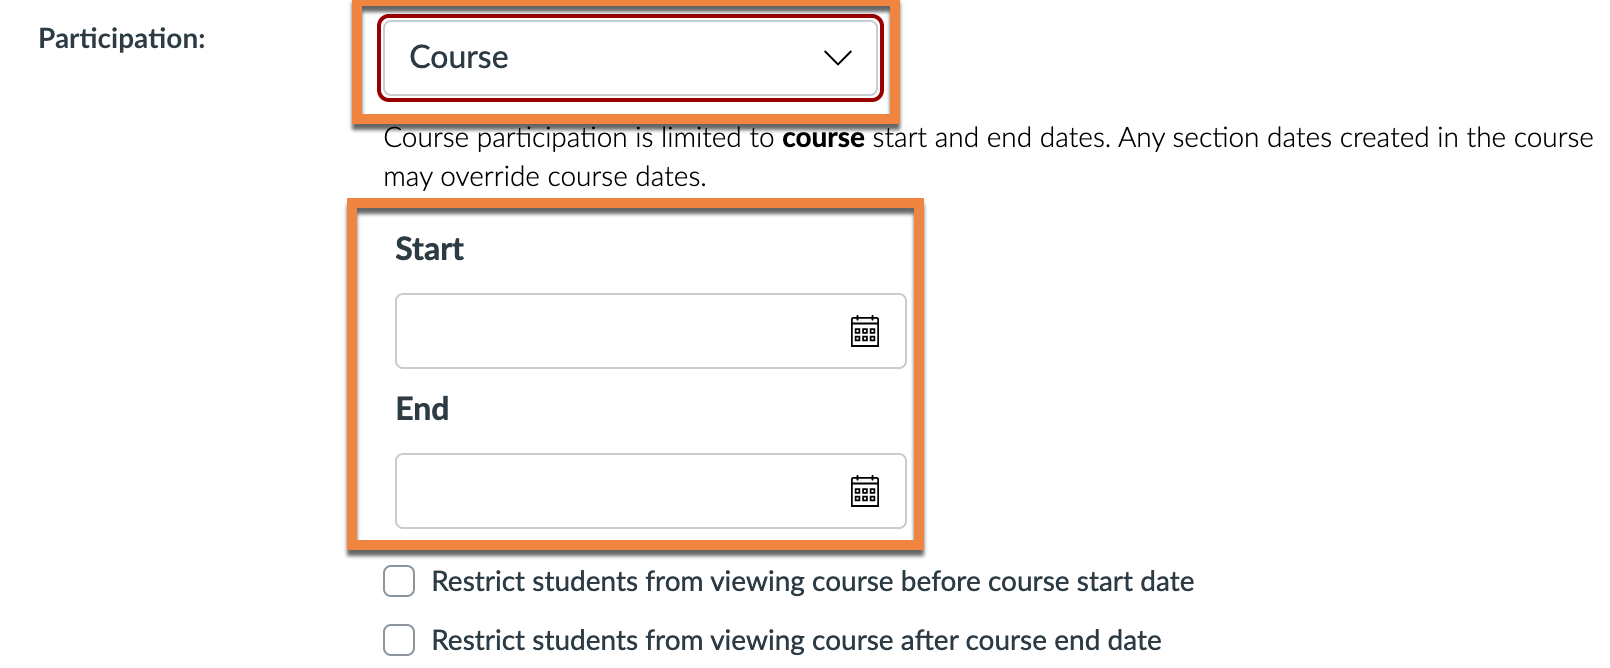 Participation menu is shown with course dates selected